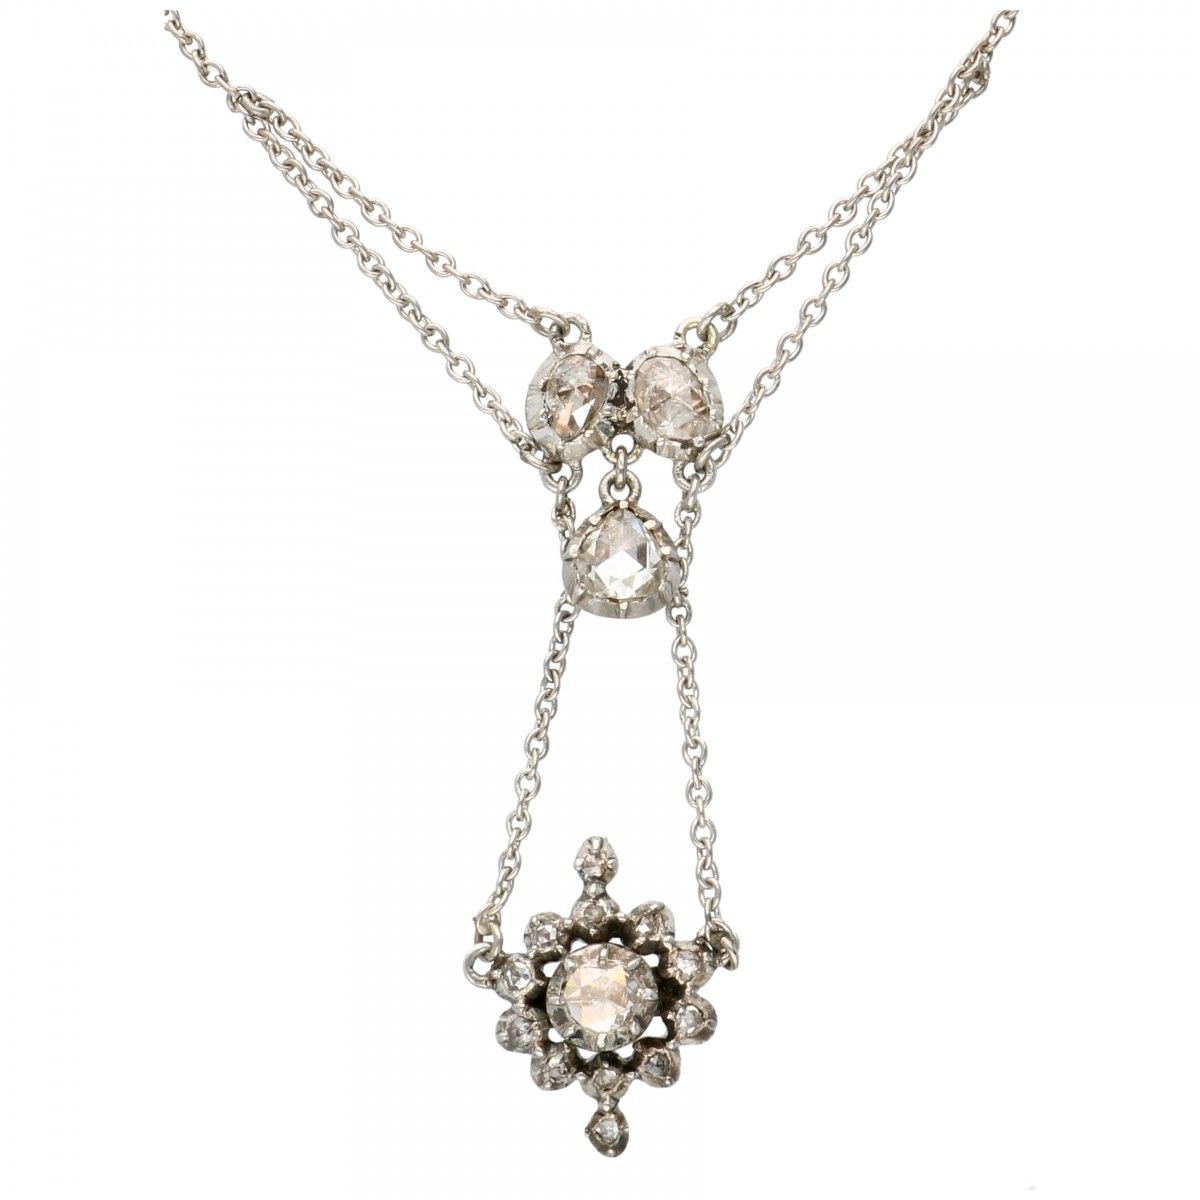 Antique silver necklace set with rose cut diamonds - 925/1000. With a safety cli&hellip;